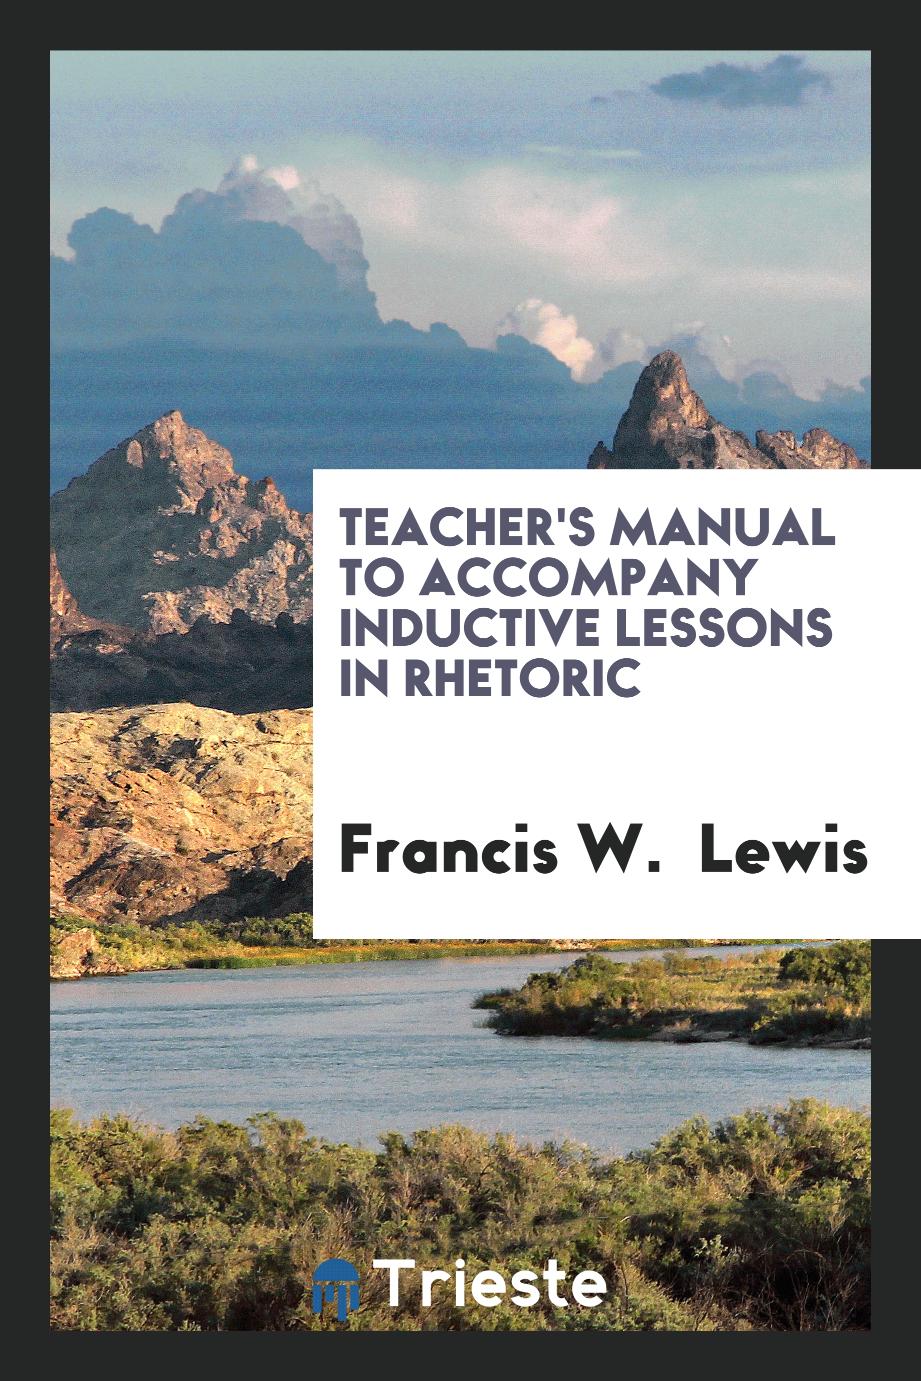 Teacher's Manual to Accompany Inductive Lessons in Rhetoric